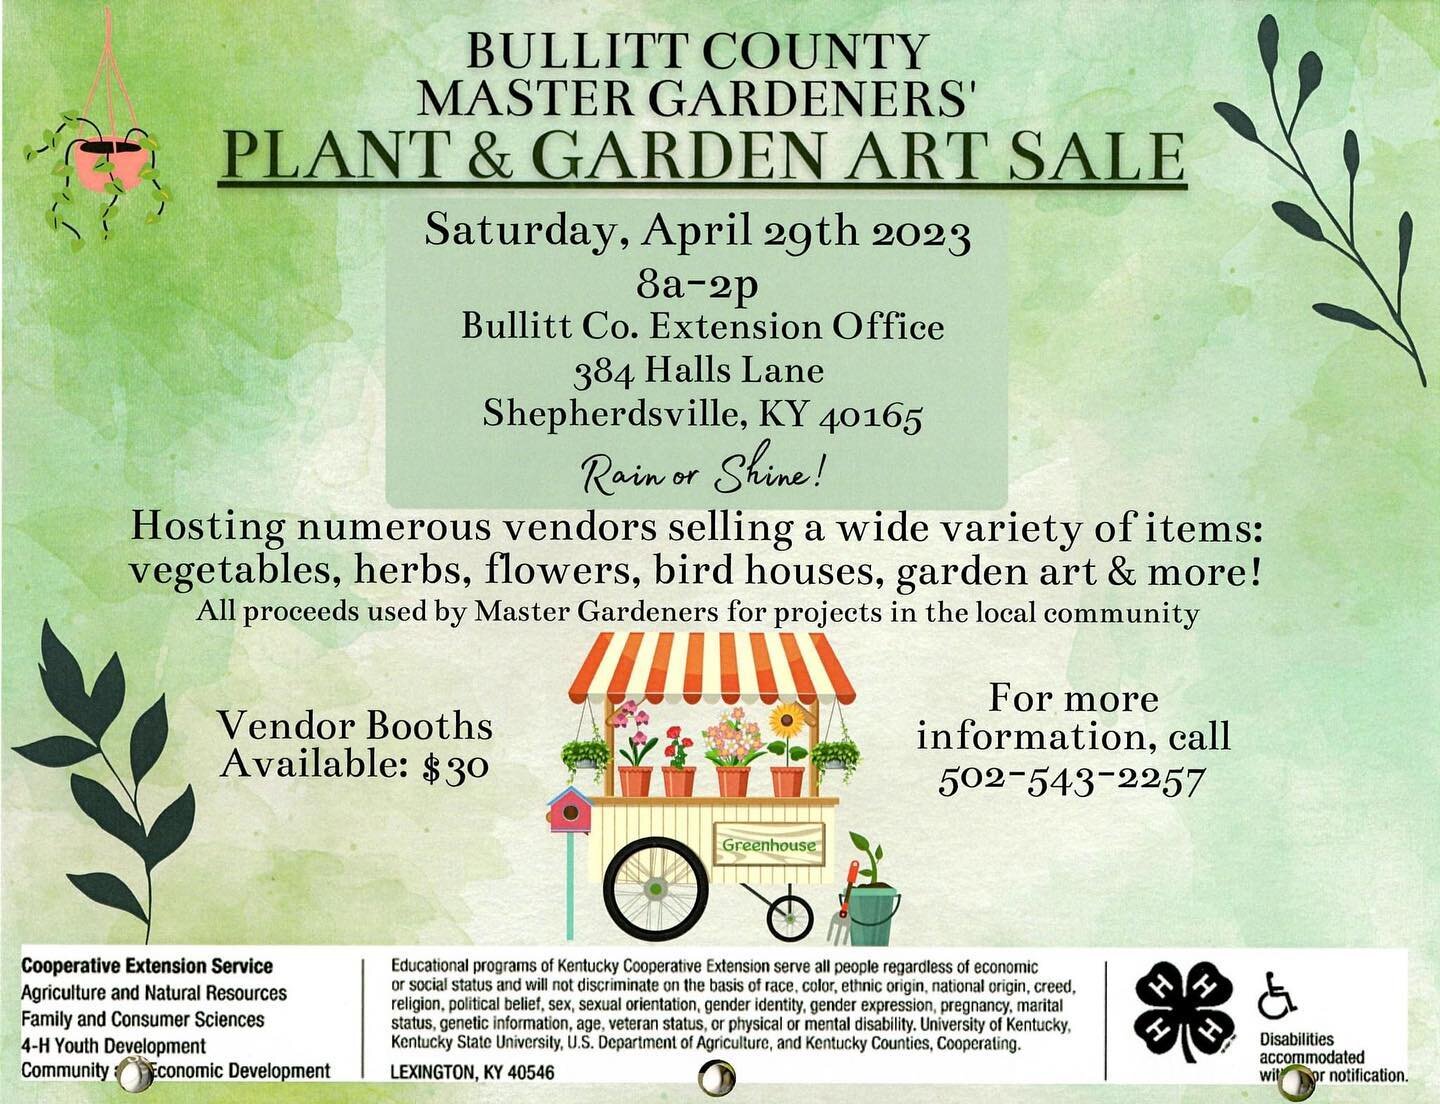 Mark your calendar for the annual Bullitt County Masters&rsquo; Gardener Plant and Garden Art Sale this April. Be sure to come out and see us. We&rsquo;ll have vegetable plants, all kinds of herb plants, our own local honey ,beeswax lip balms and goa